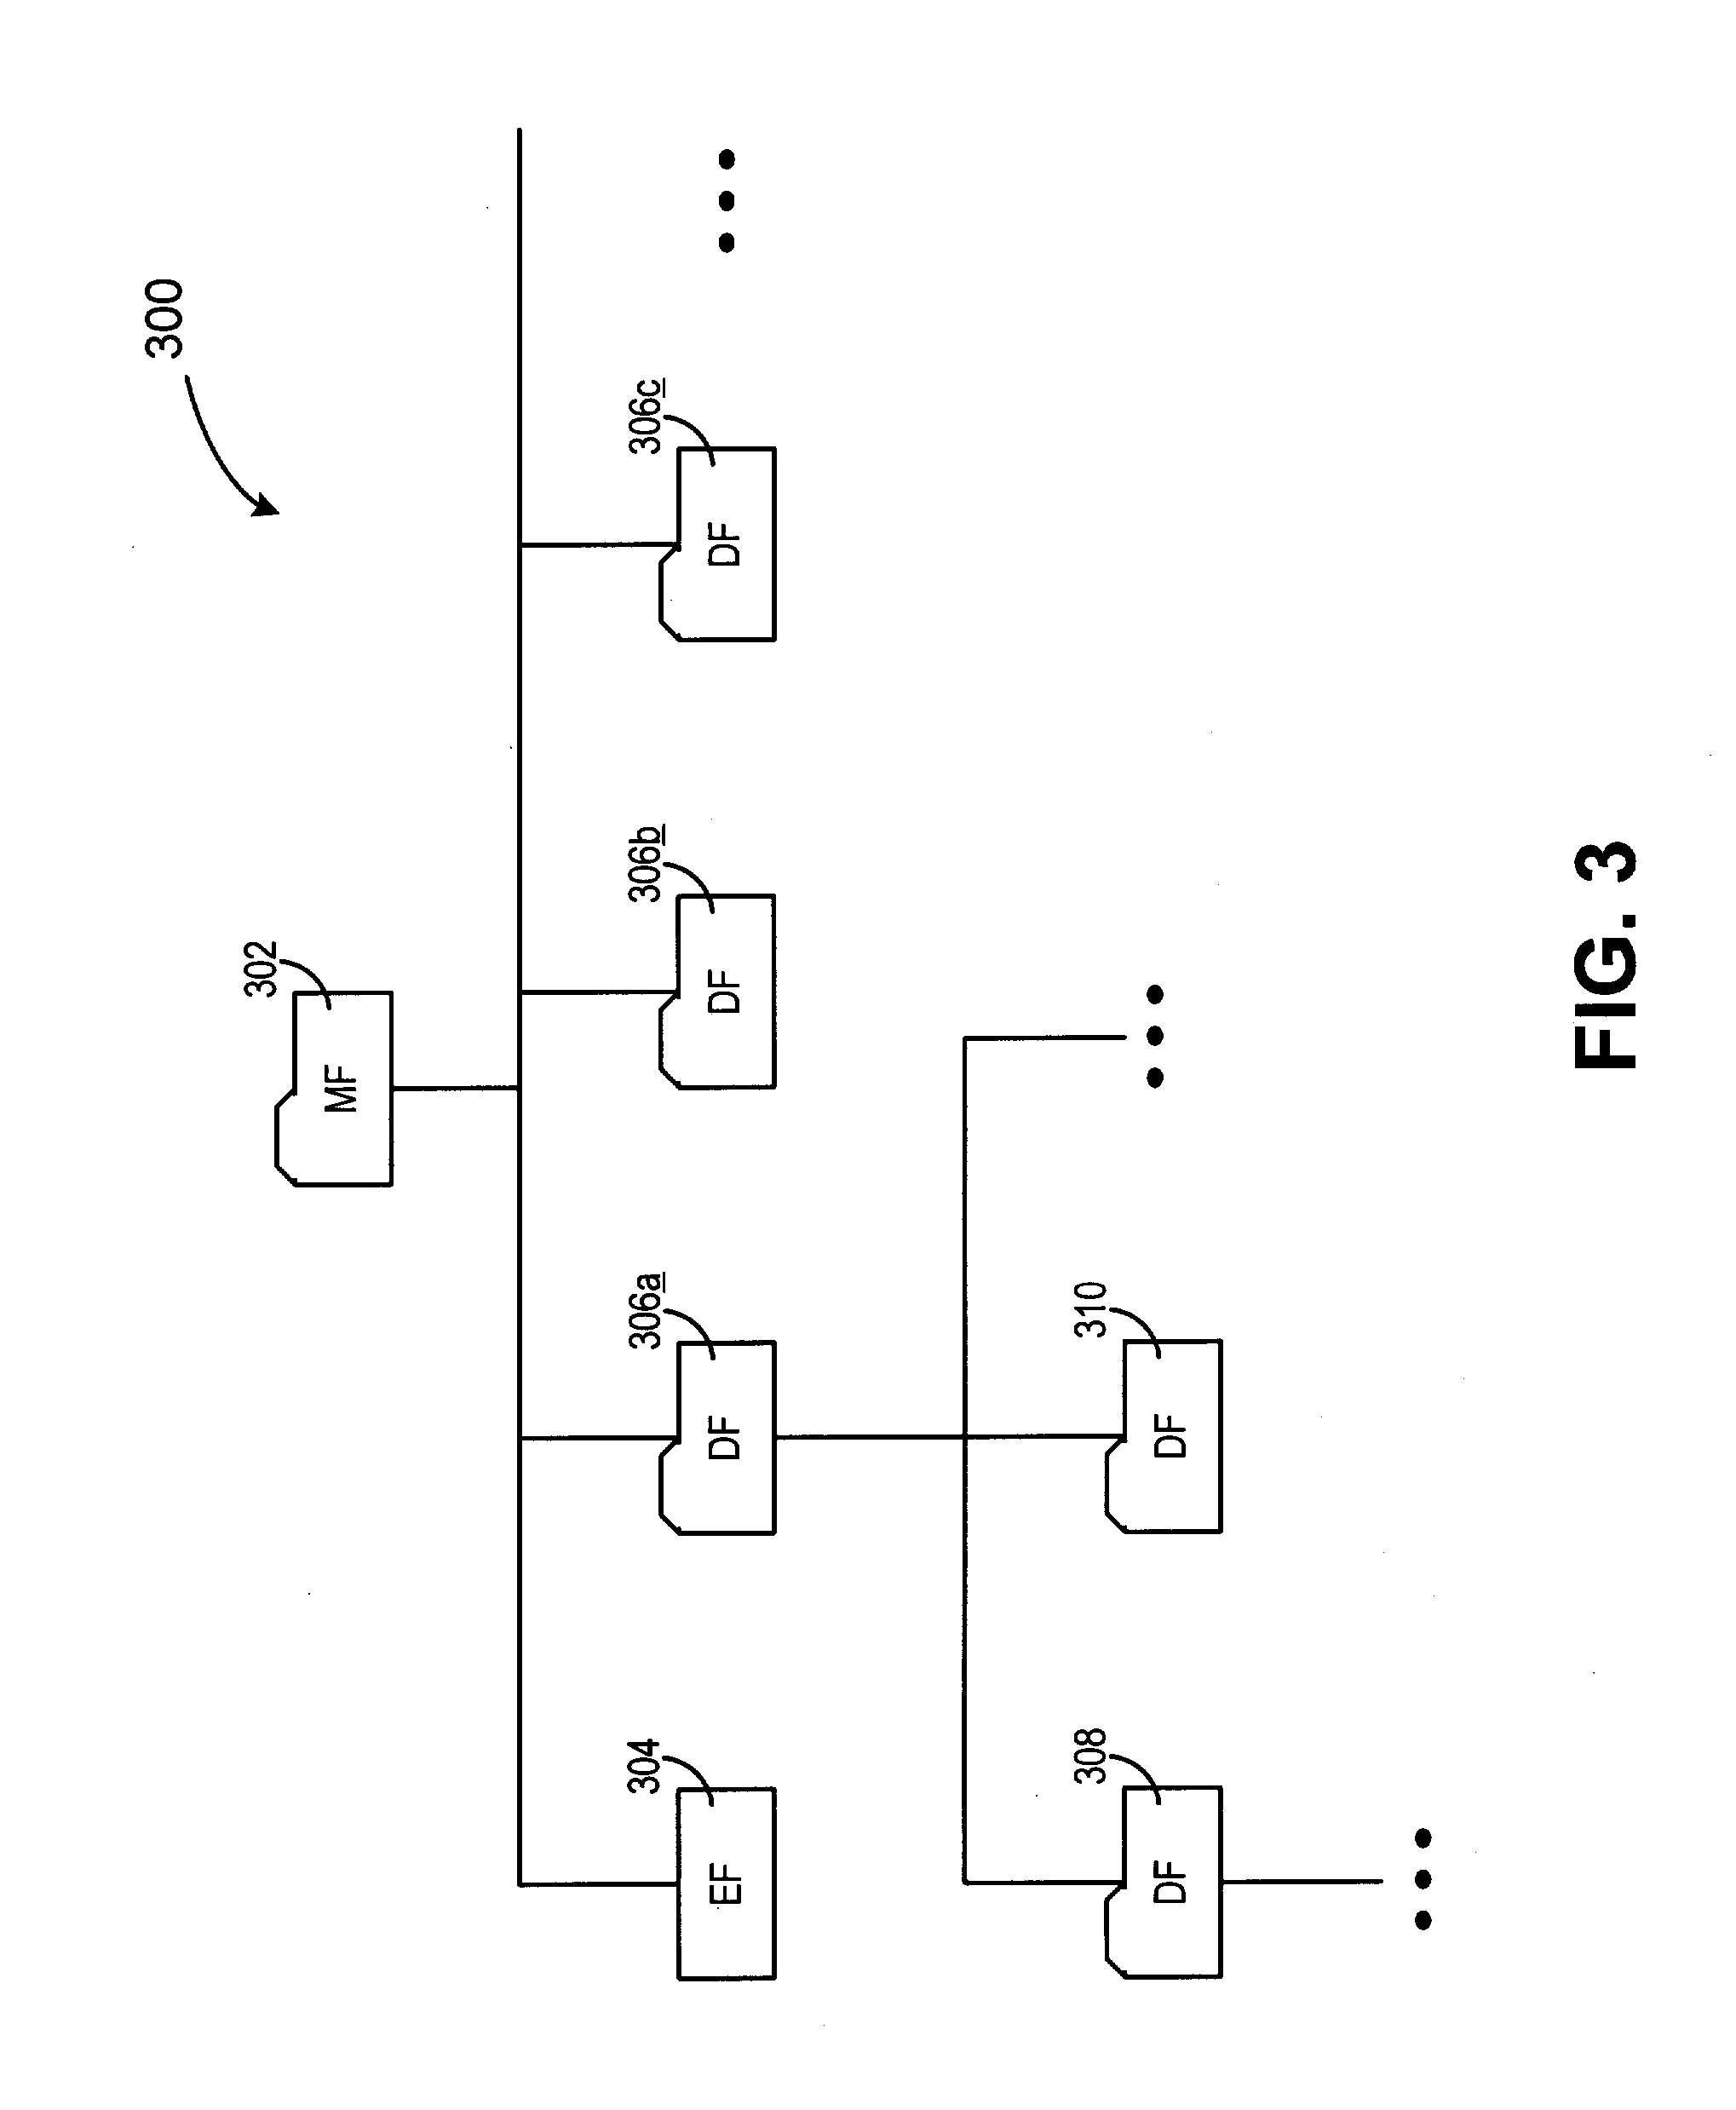 Method and system for DNA recognition biometrics on a smartcard